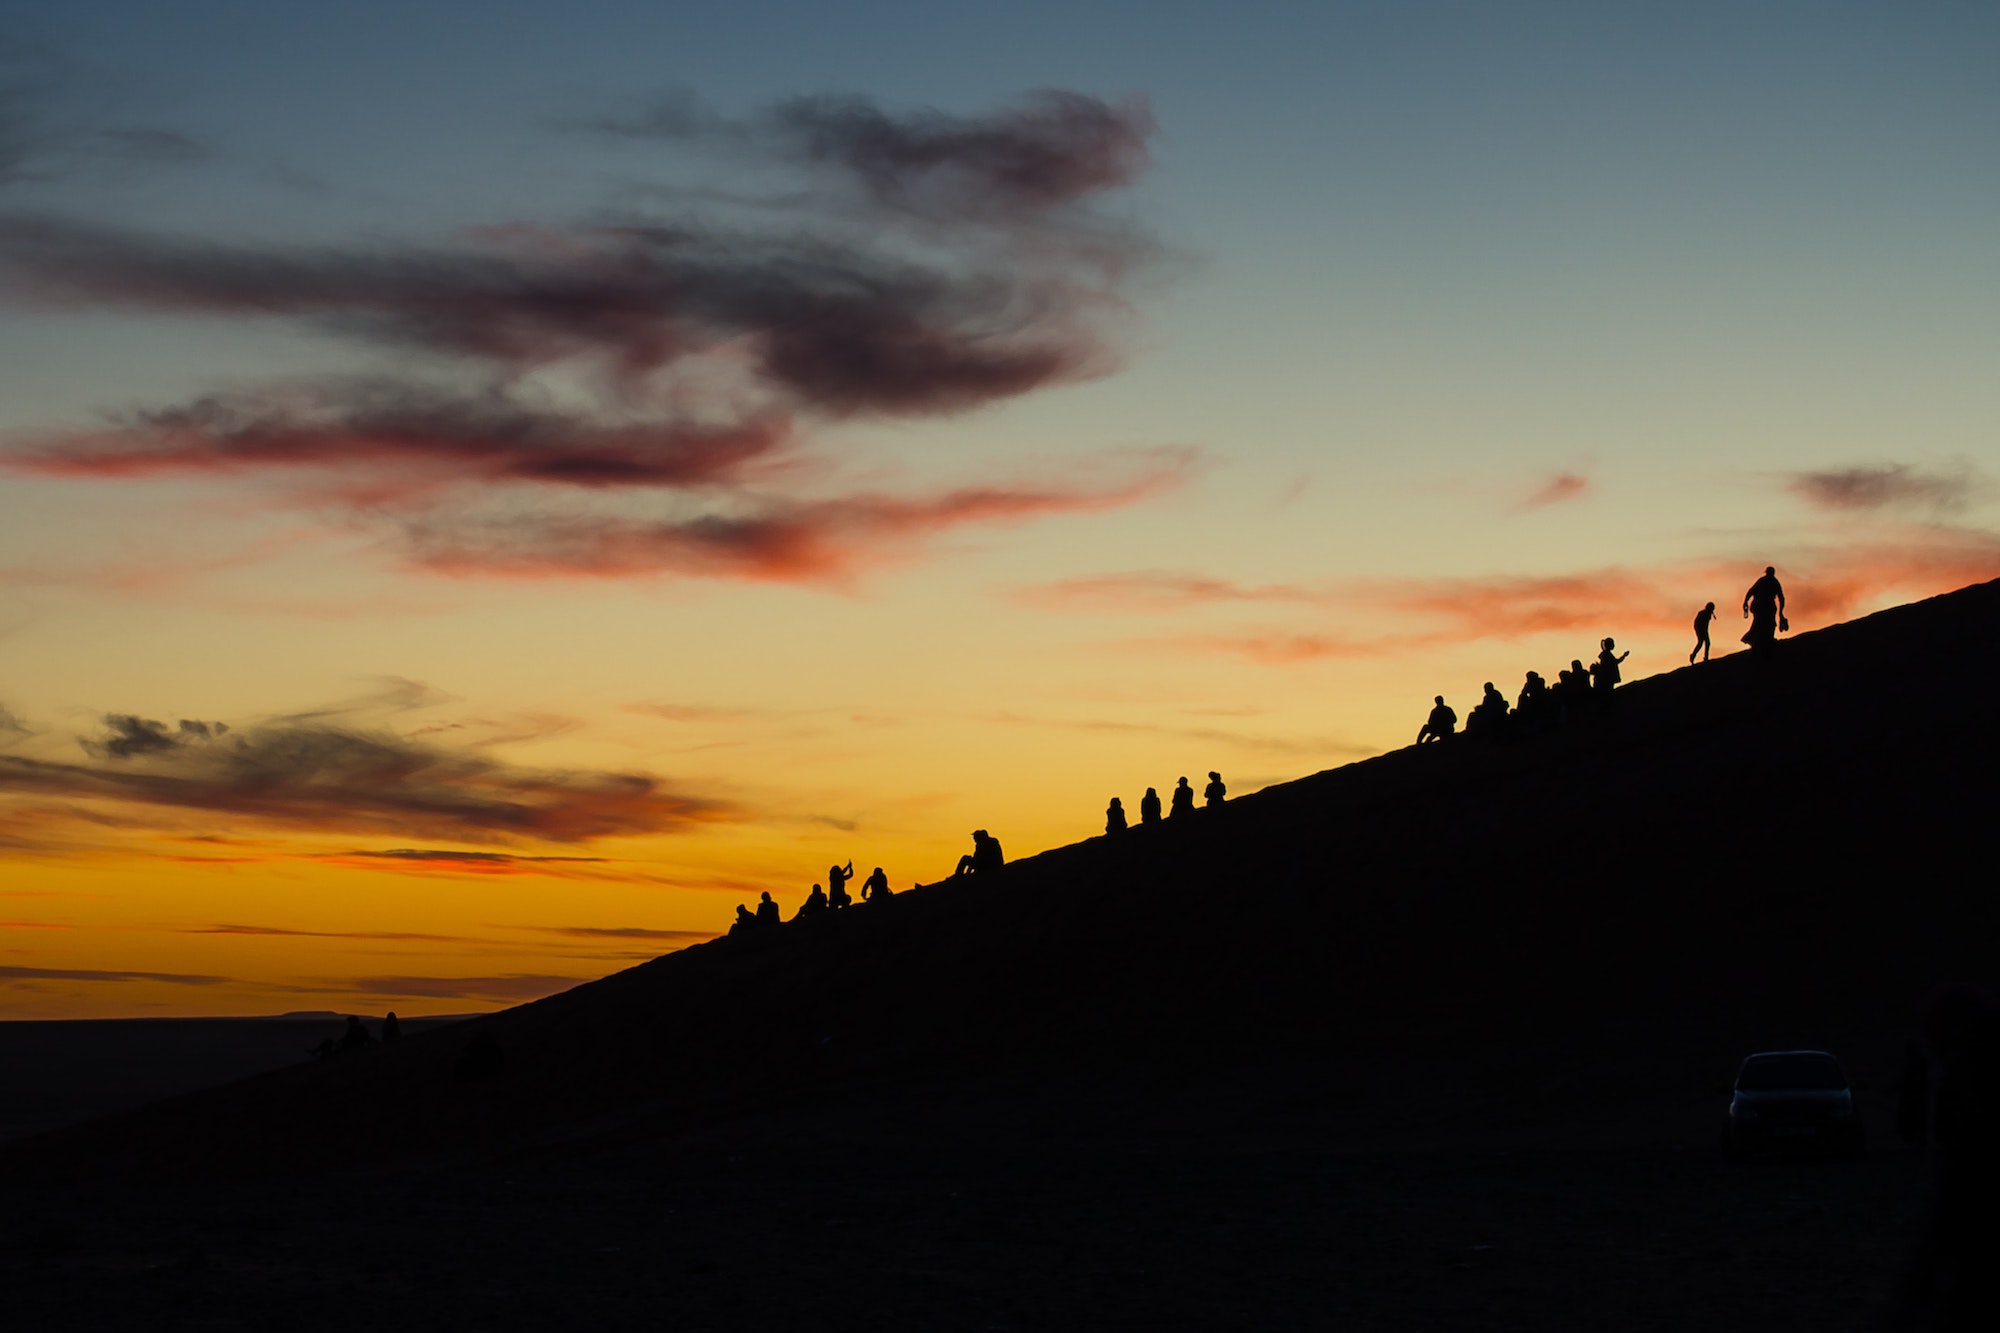 People silohetted against a hill at sunset